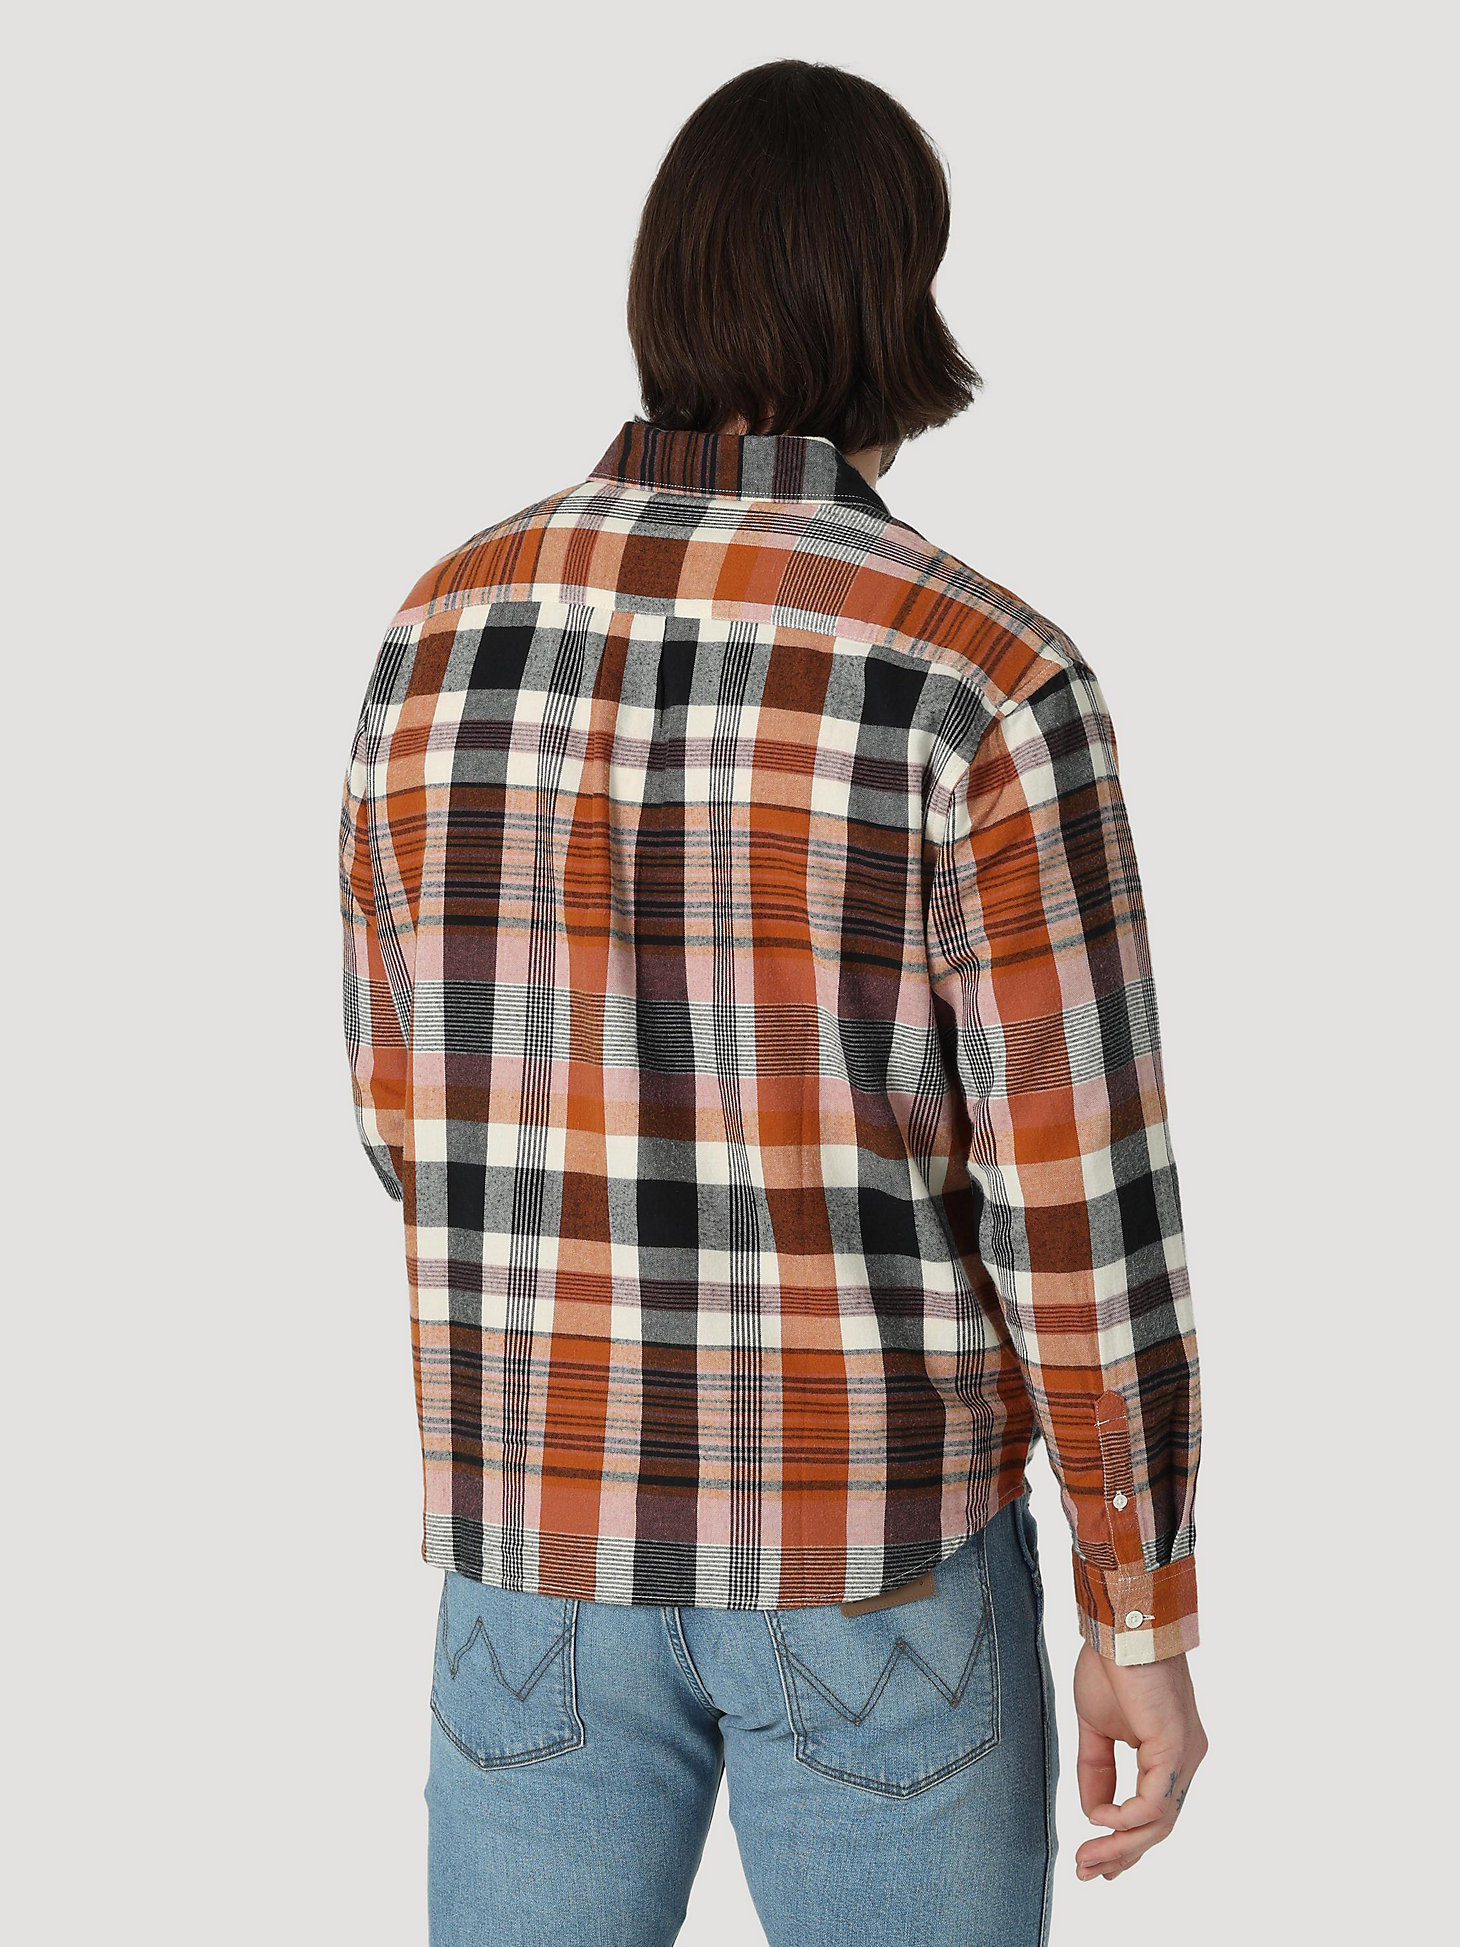 Men's Plaid Button-Up Shirt in Withered Rose alternative view 1